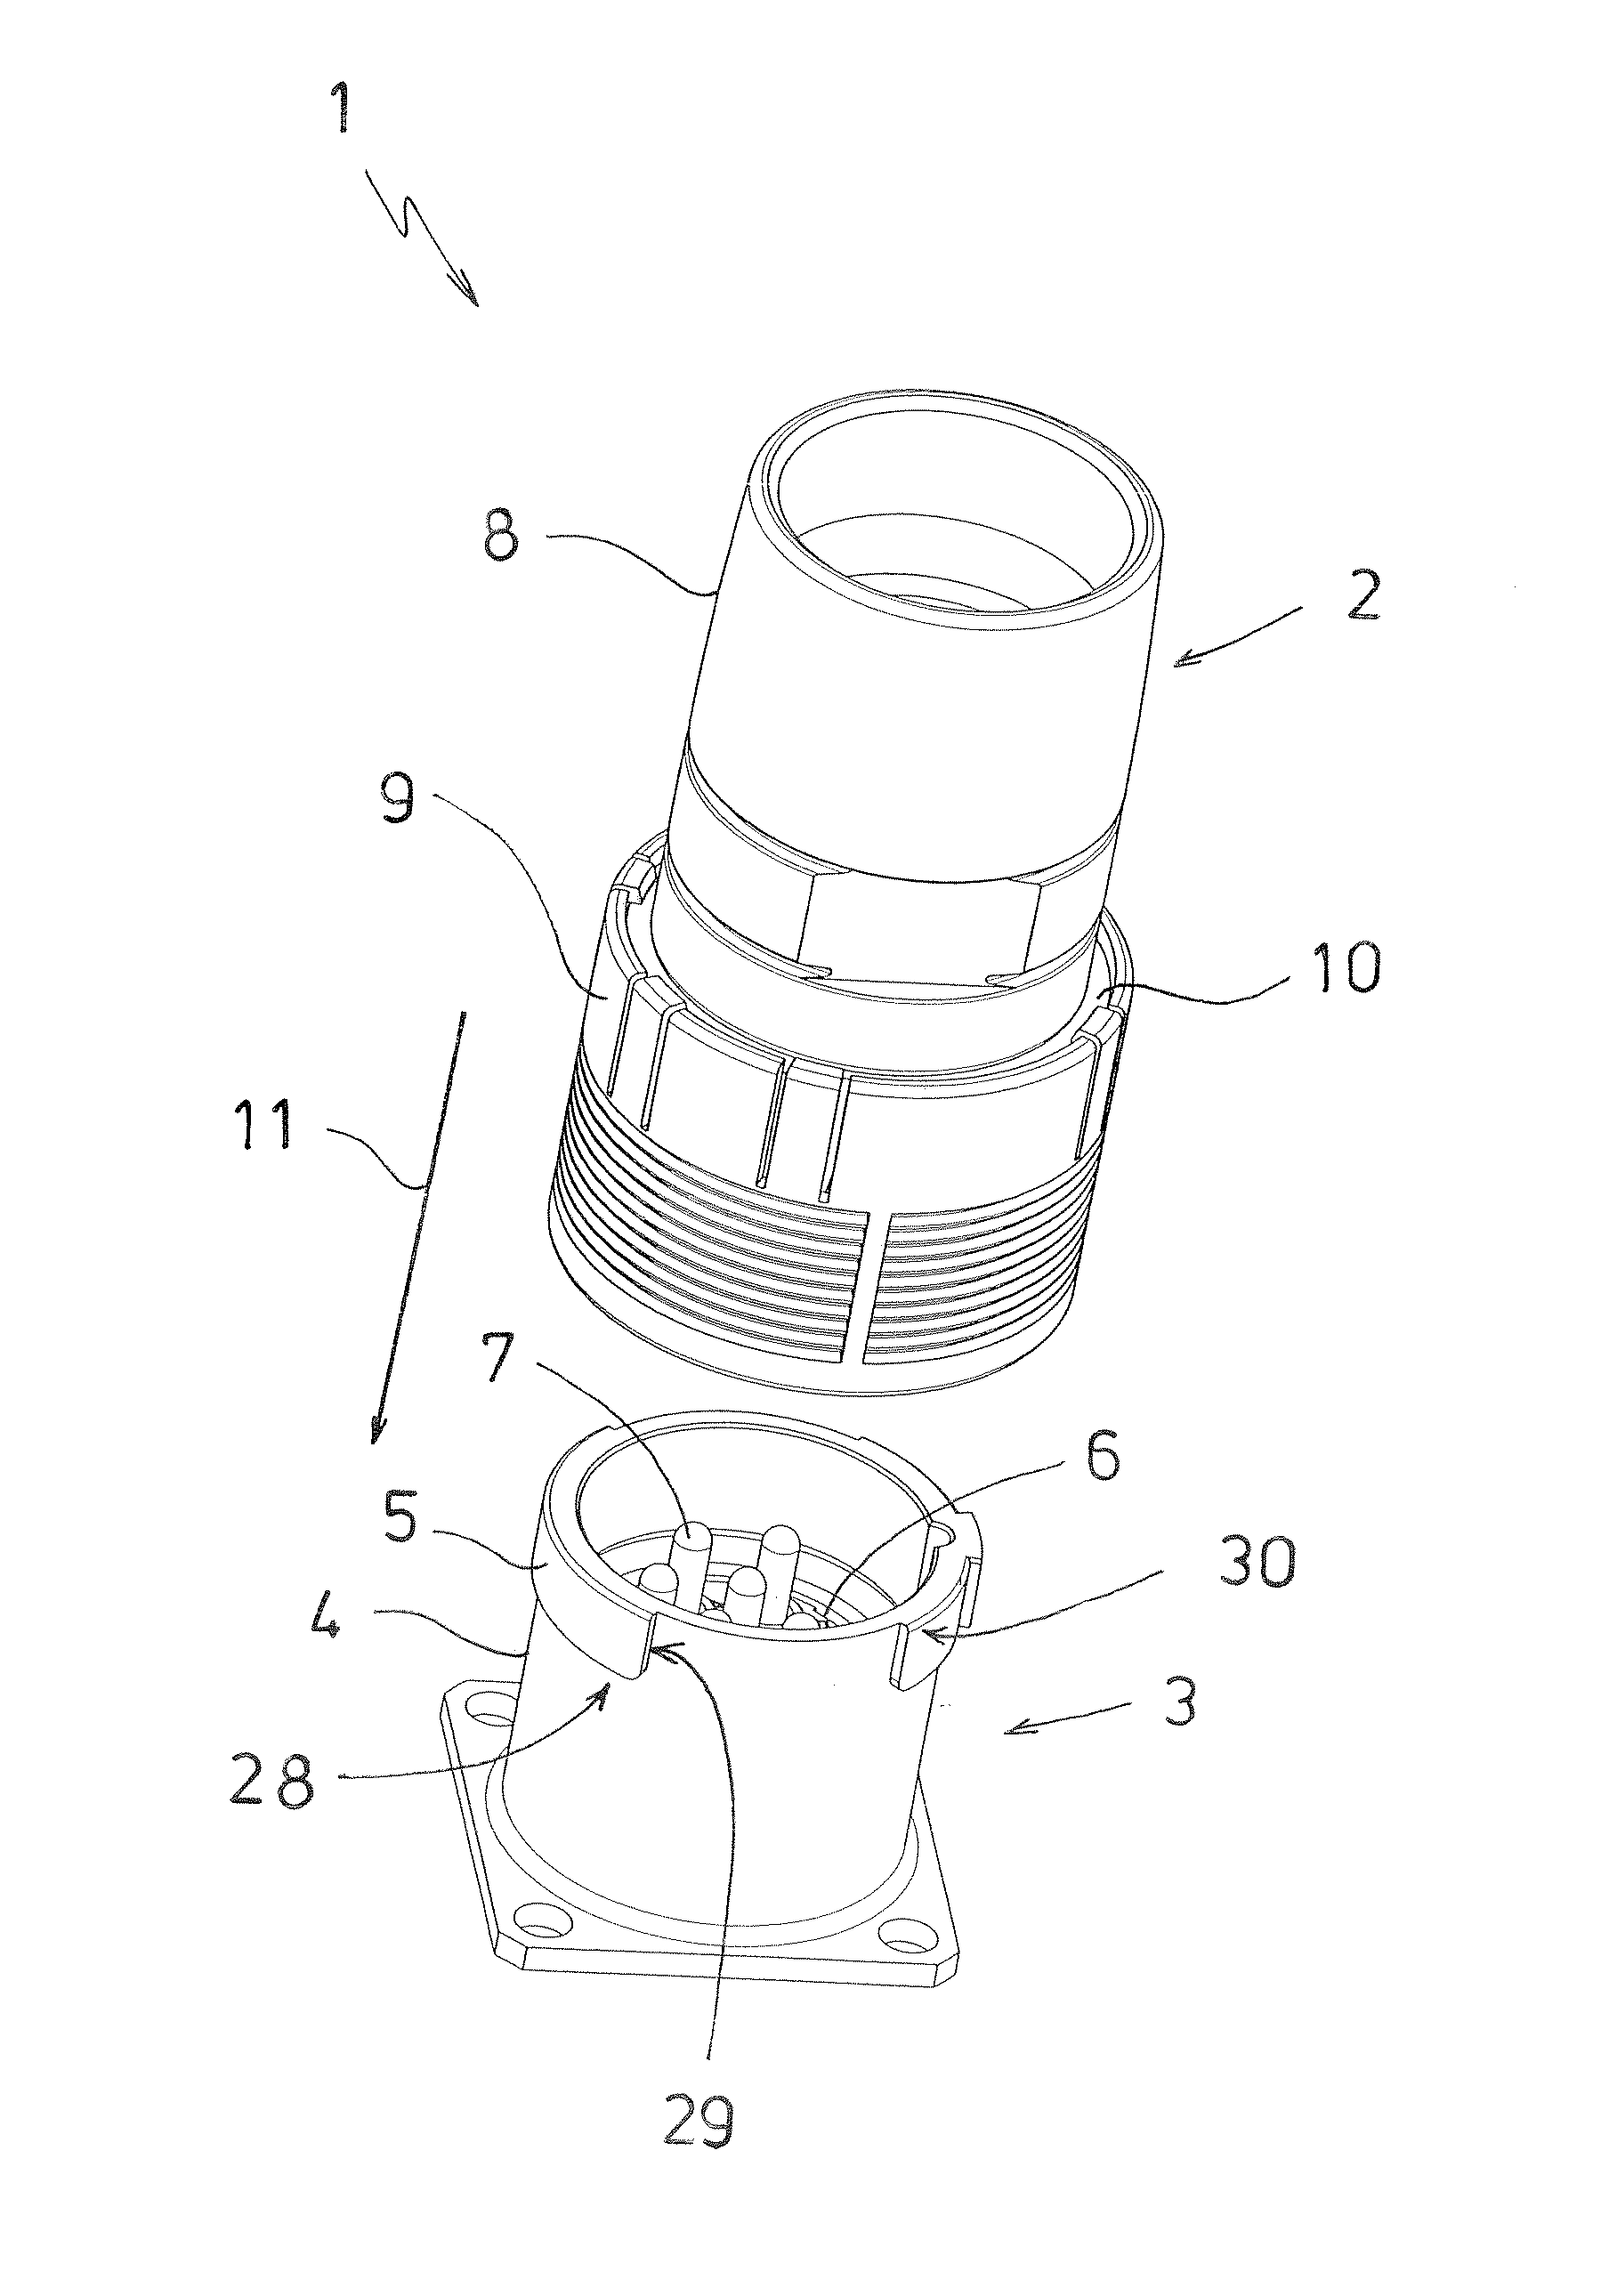 Electrical push-pull plug connector